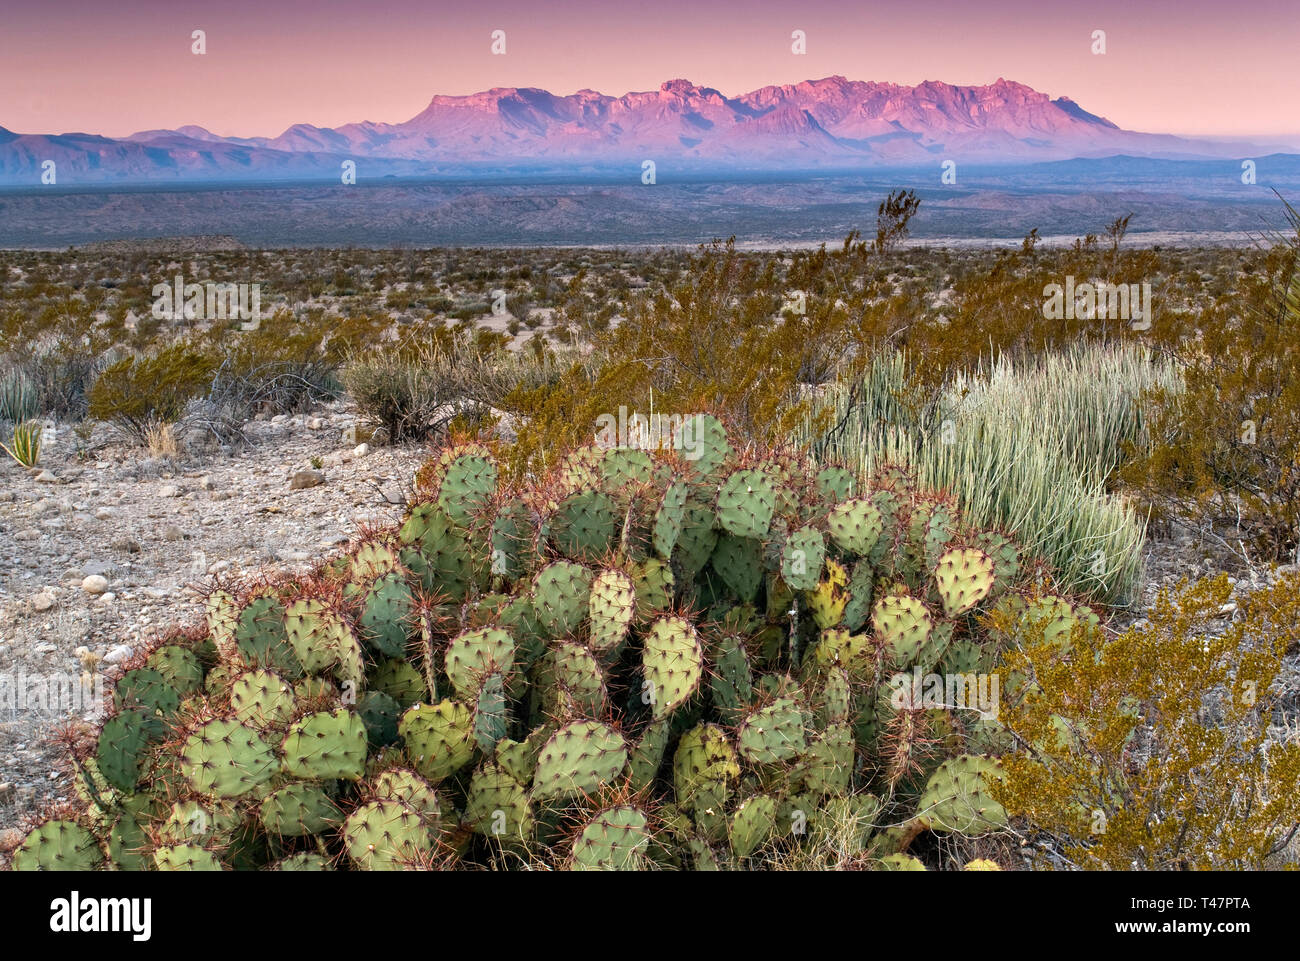 Chisos Mountains in dist at sunrise, prickly pear, lechuguilla agave and creosote bush, from Old Ore Road, Big Bend National Park, Texas, USA Stock Photo